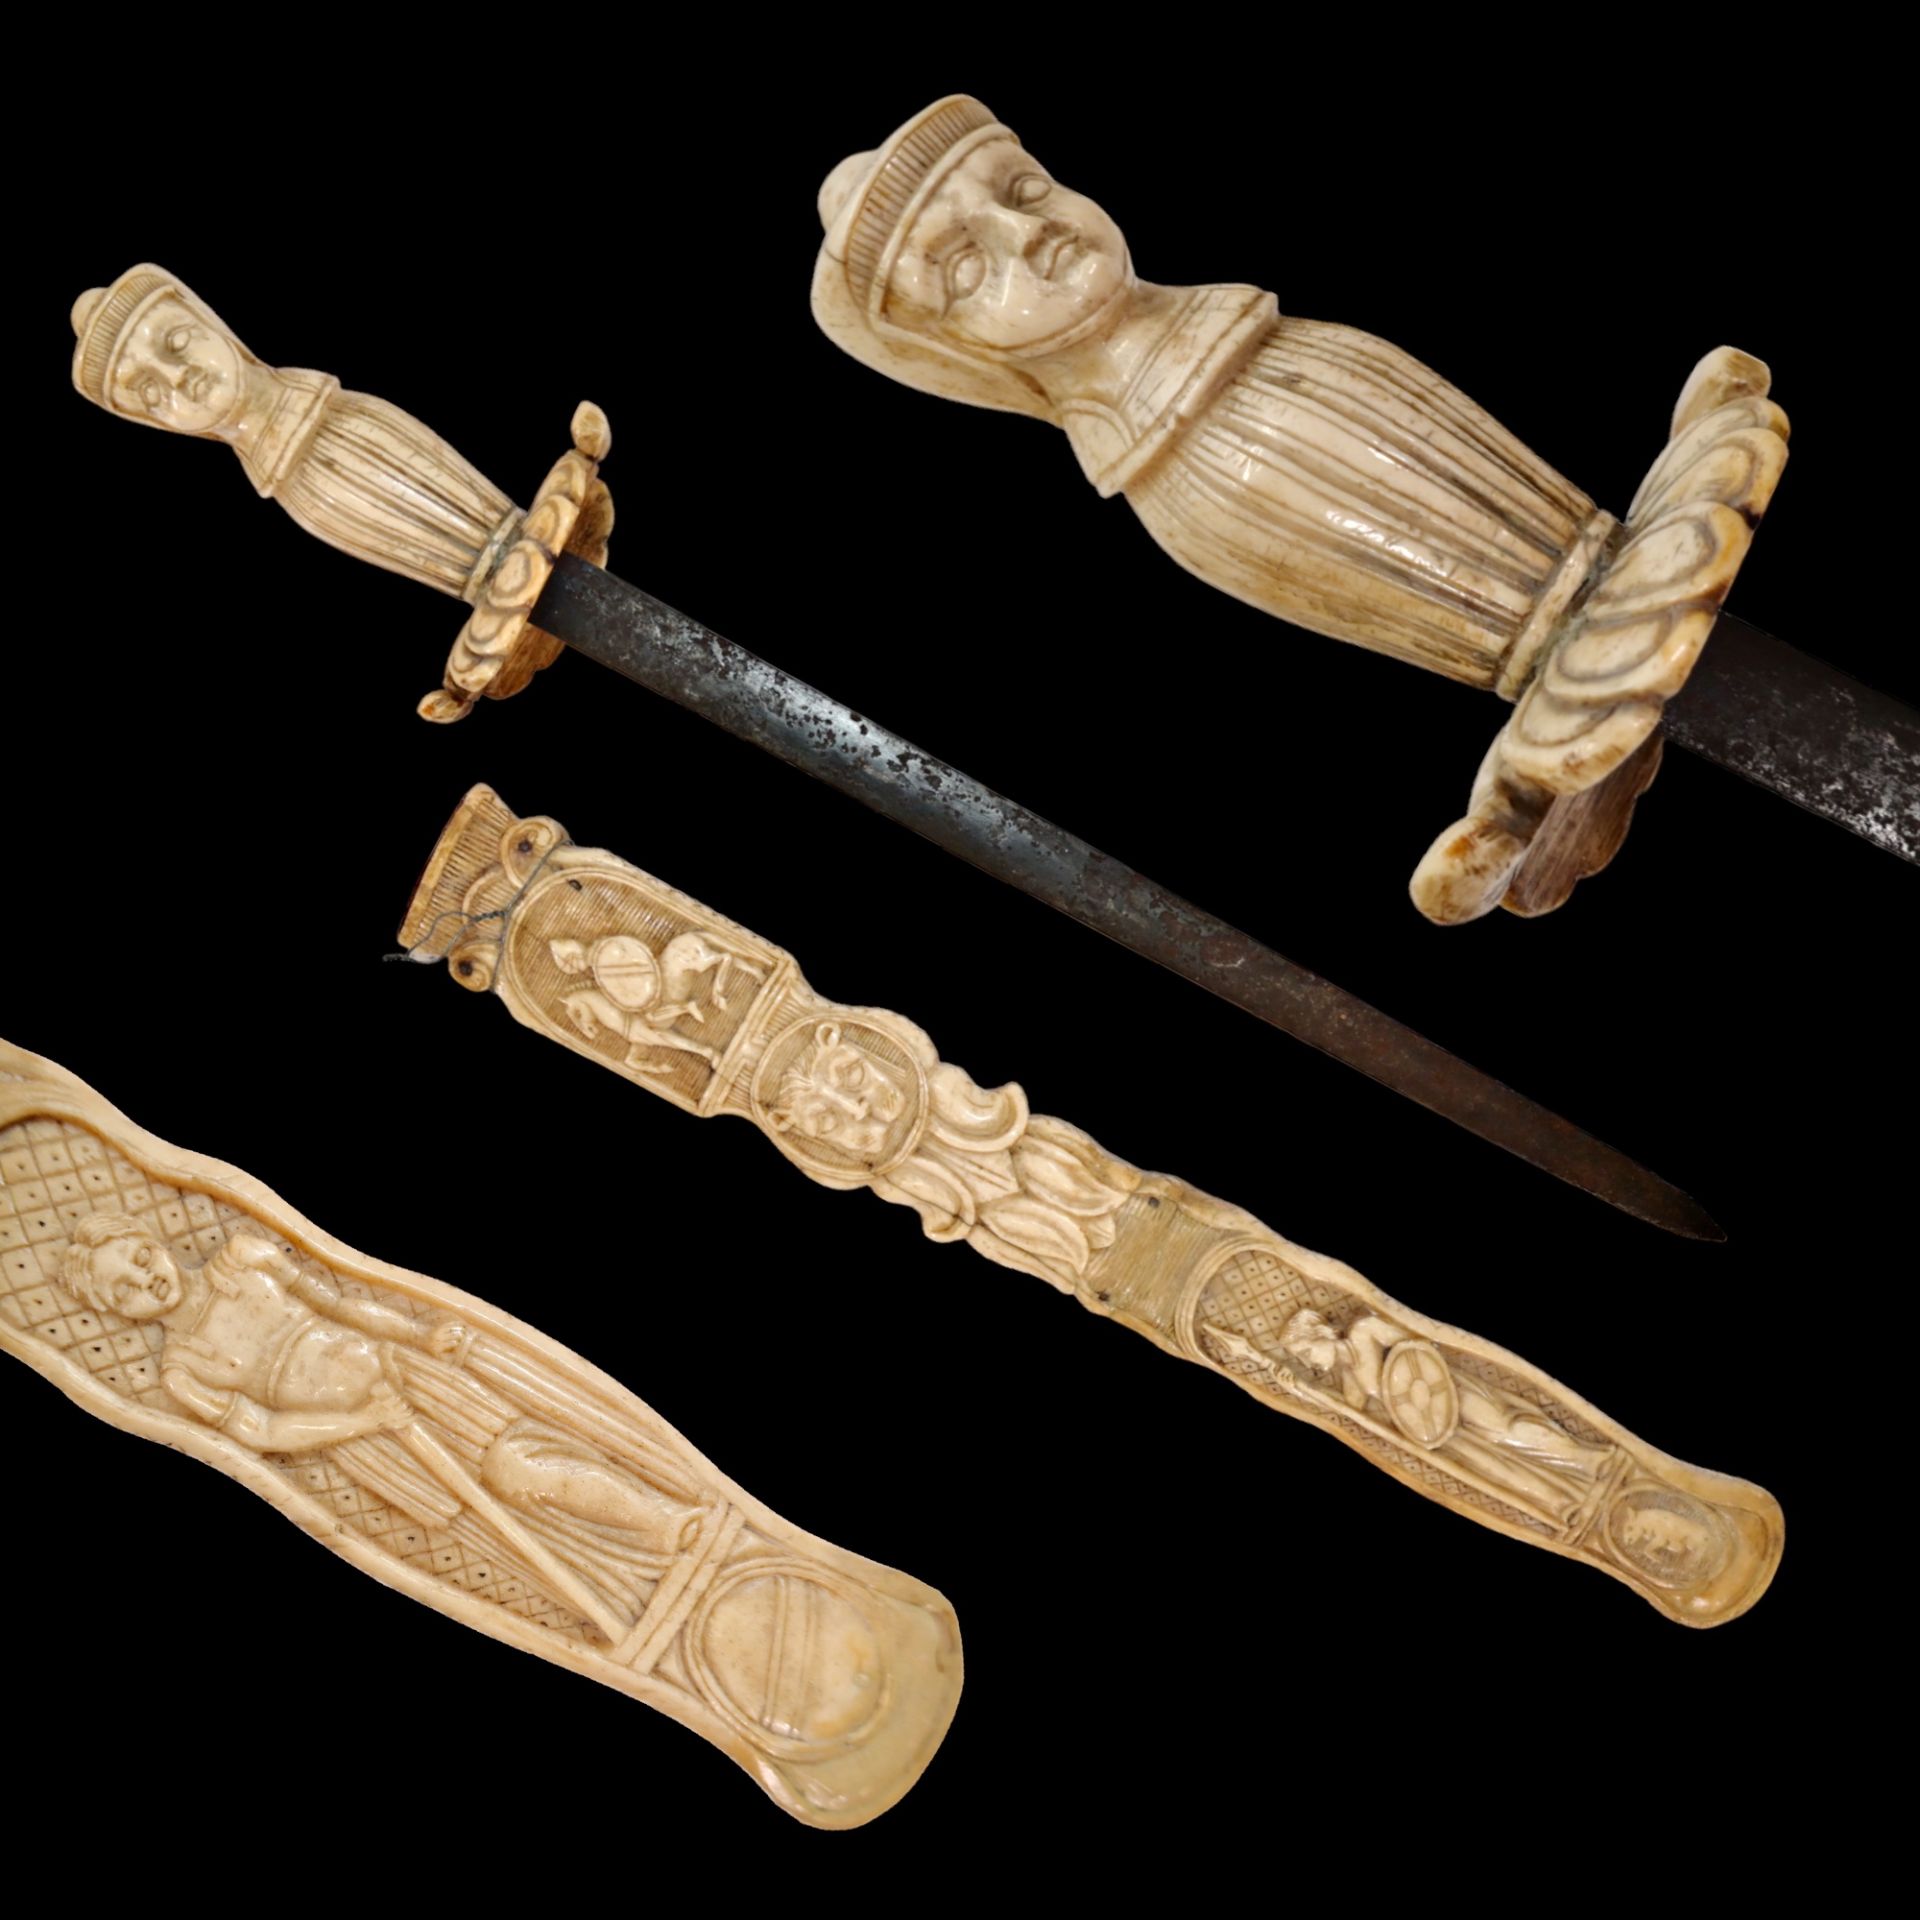 A Rare French nobleman's hunting dagger, hilt and scabbard carved from bone, 19th century.